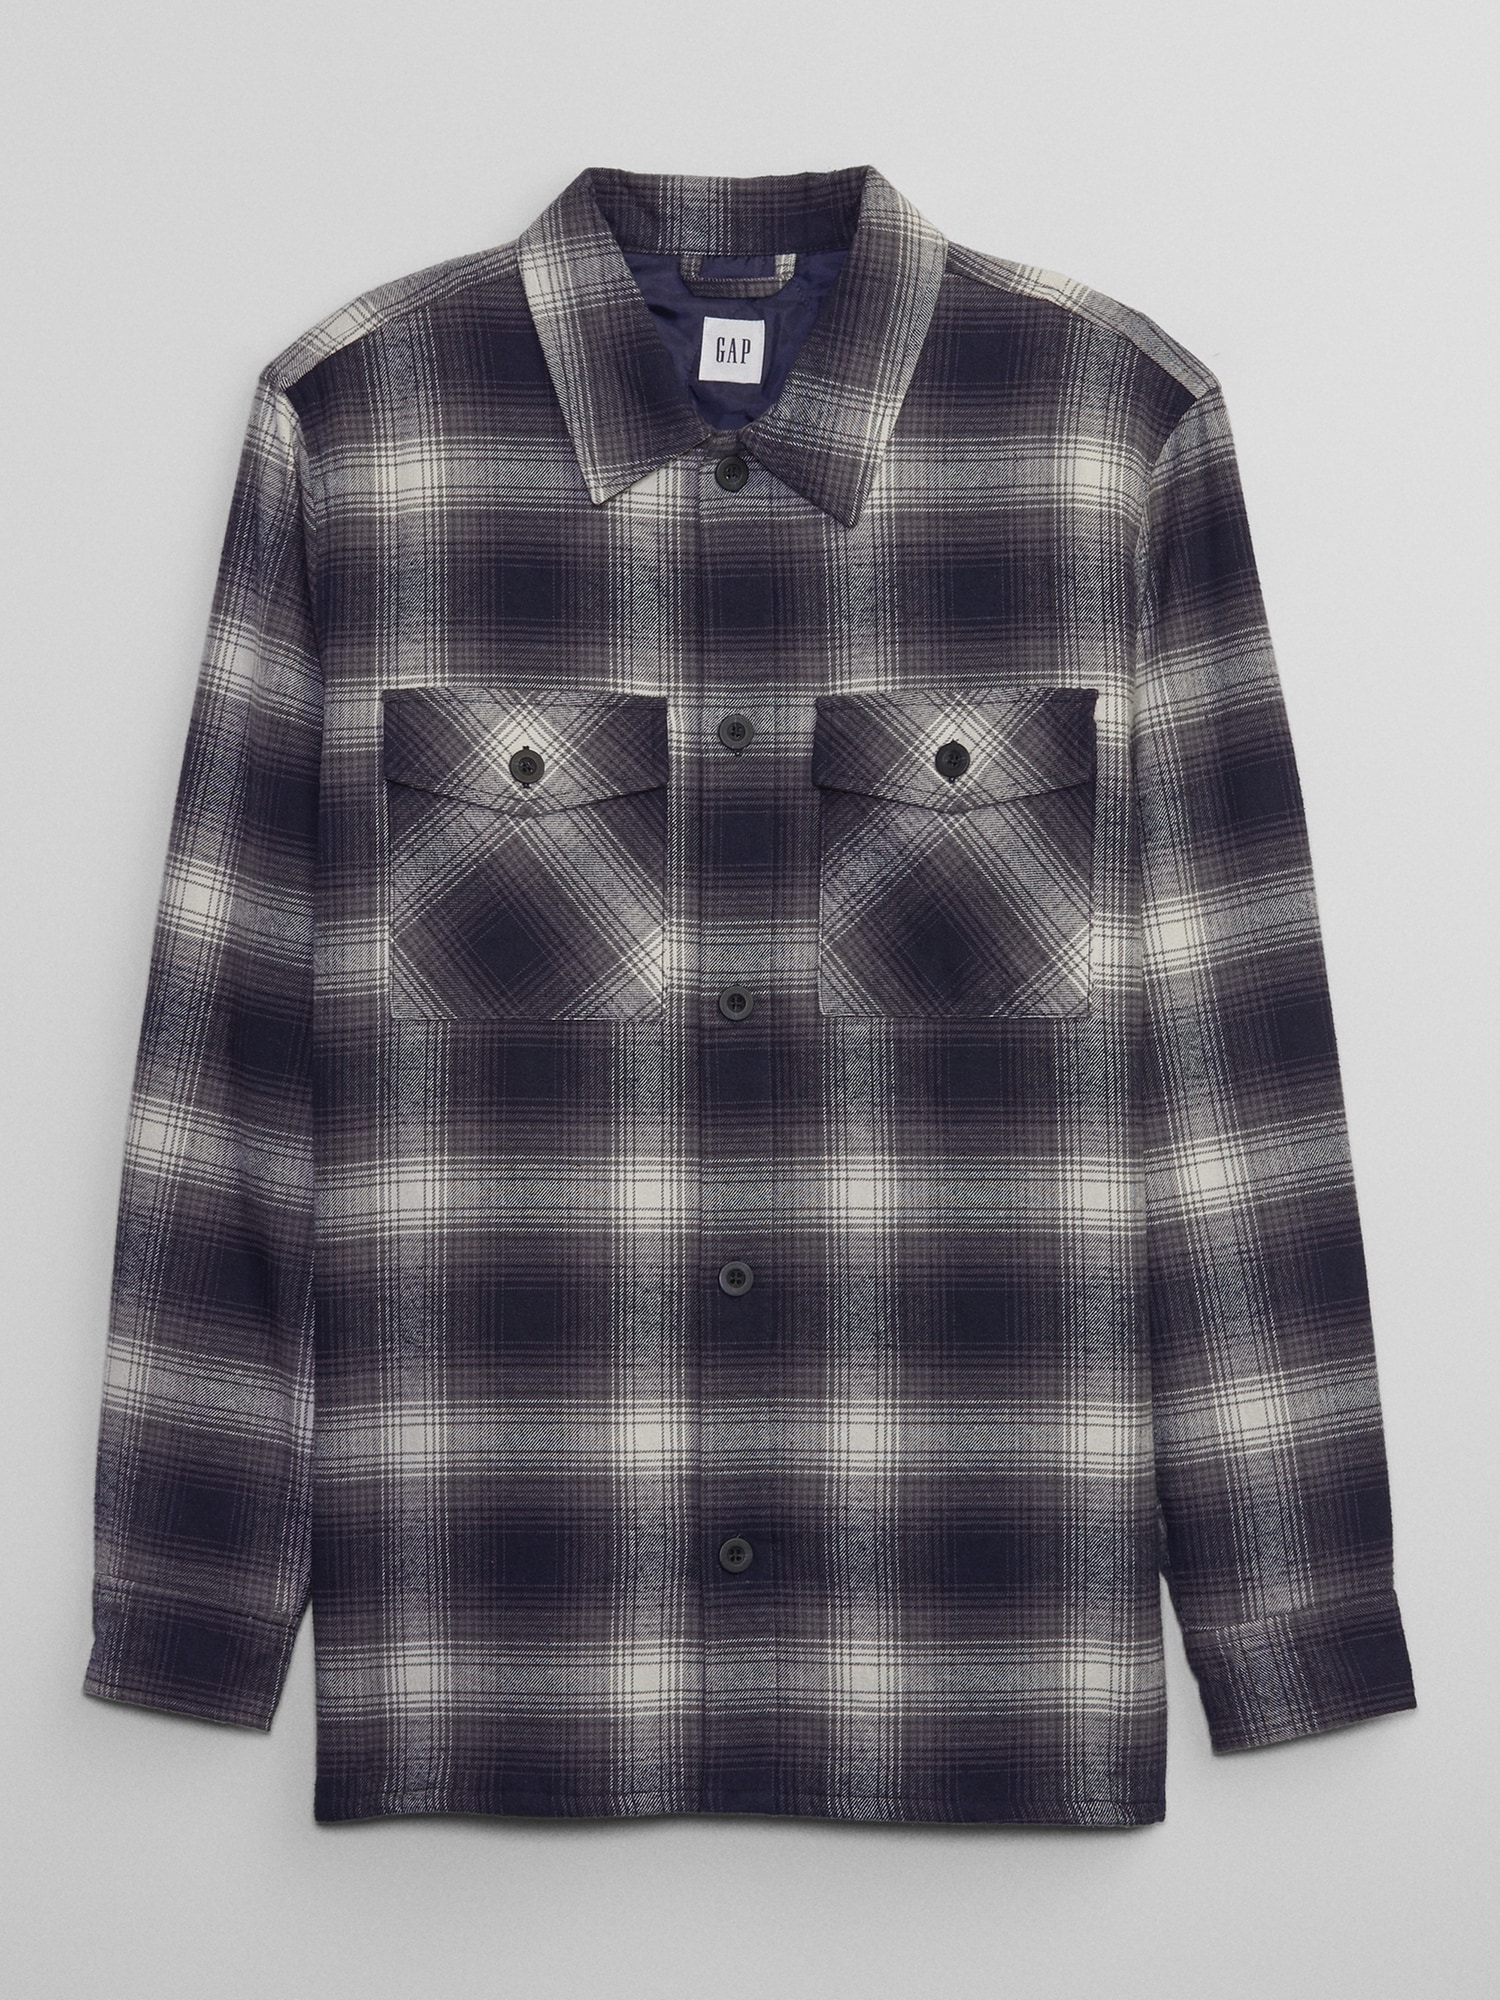 Relaxed Flannel Shirt Jacket | Gap Factory